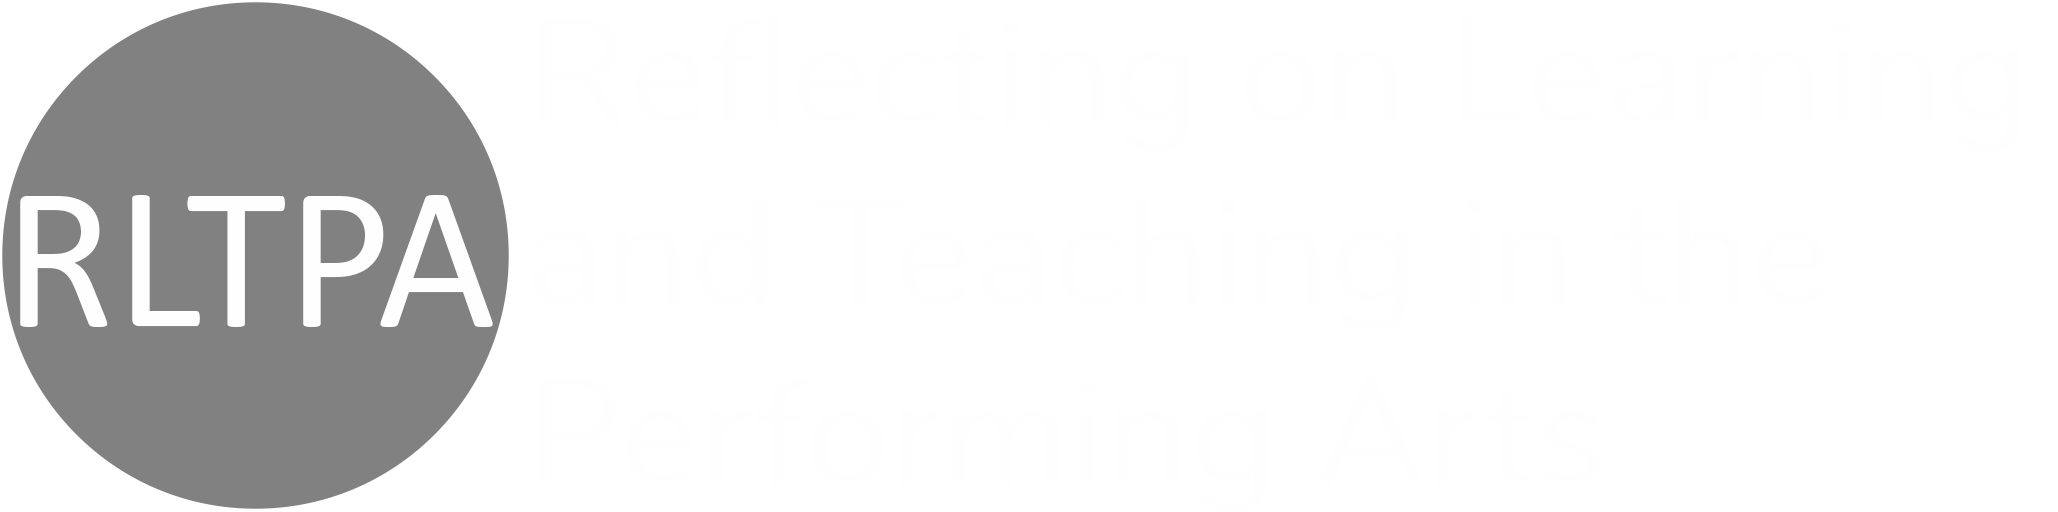 Reflecting on Learning and Teaching in the Performing Arts